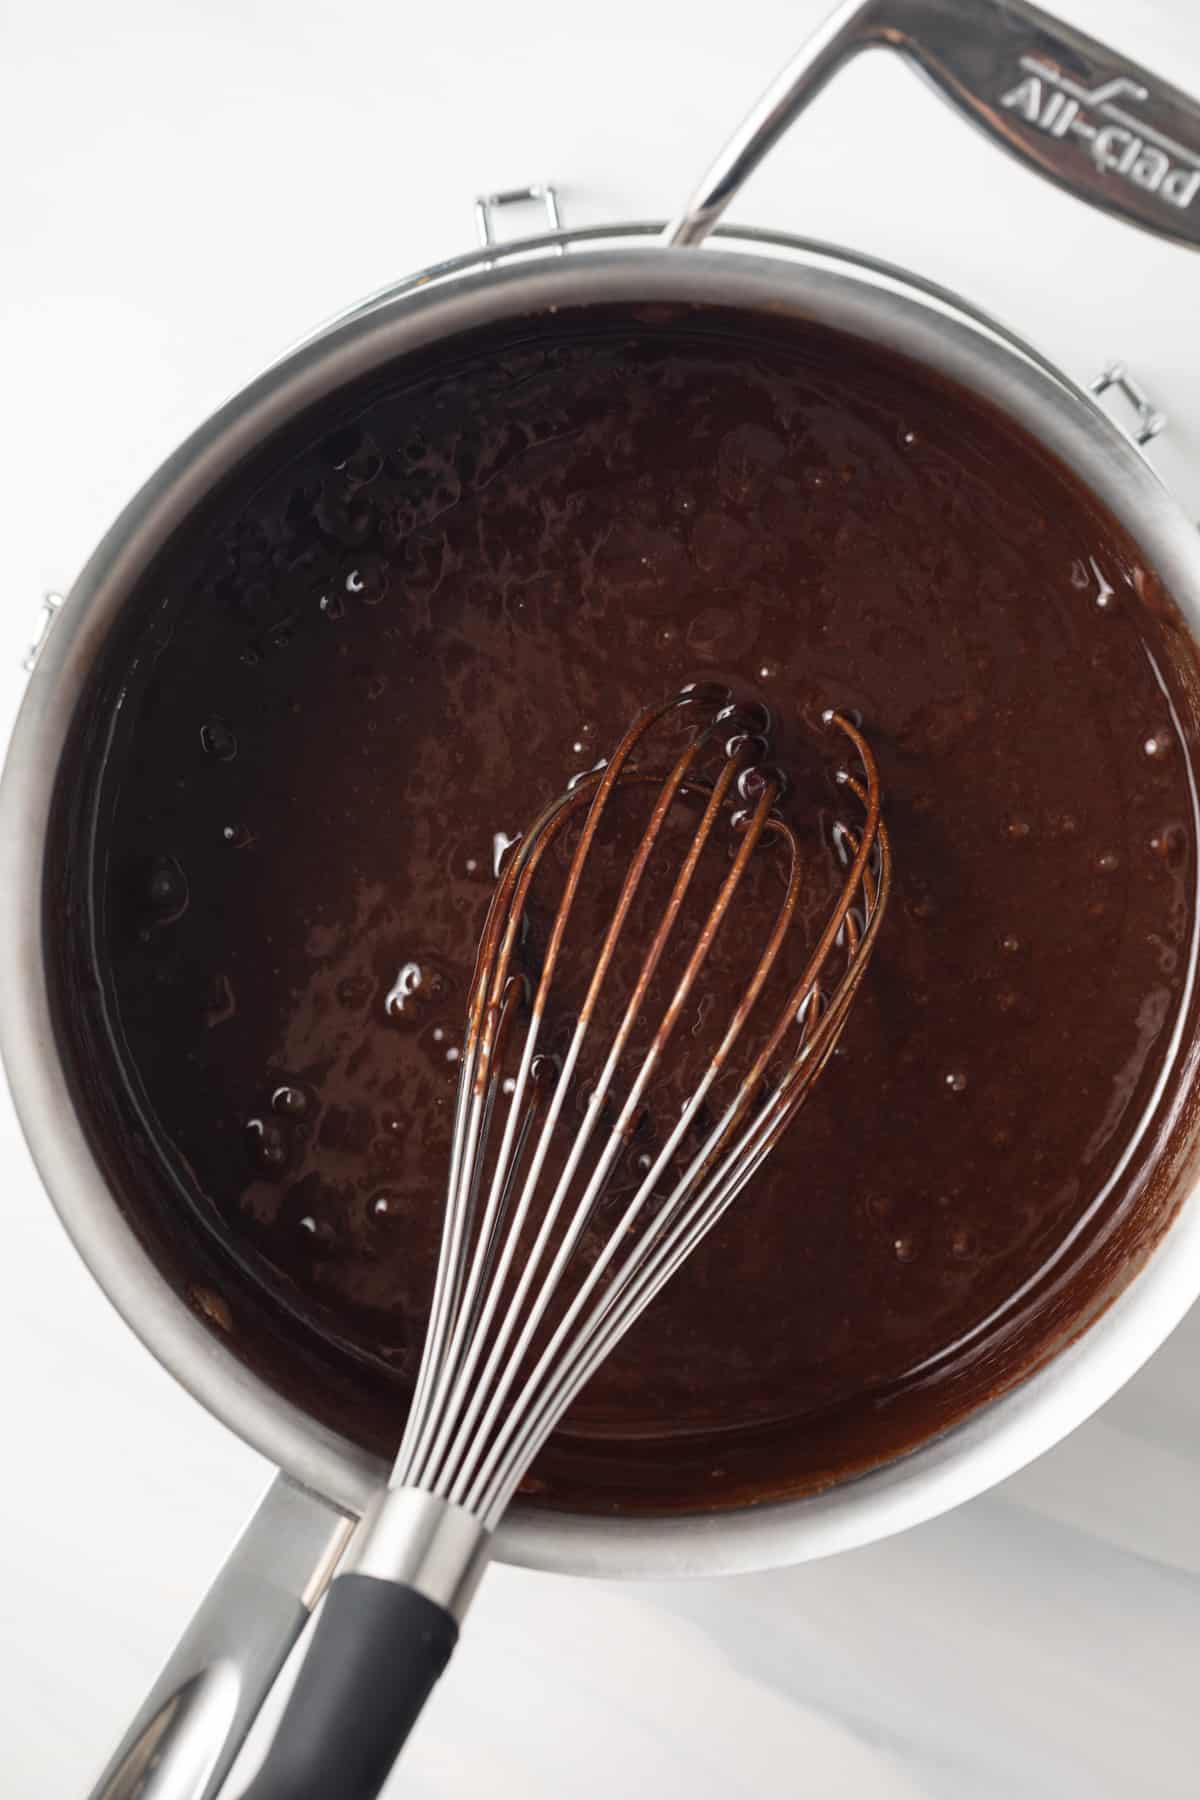 Melted chocolate in pan.